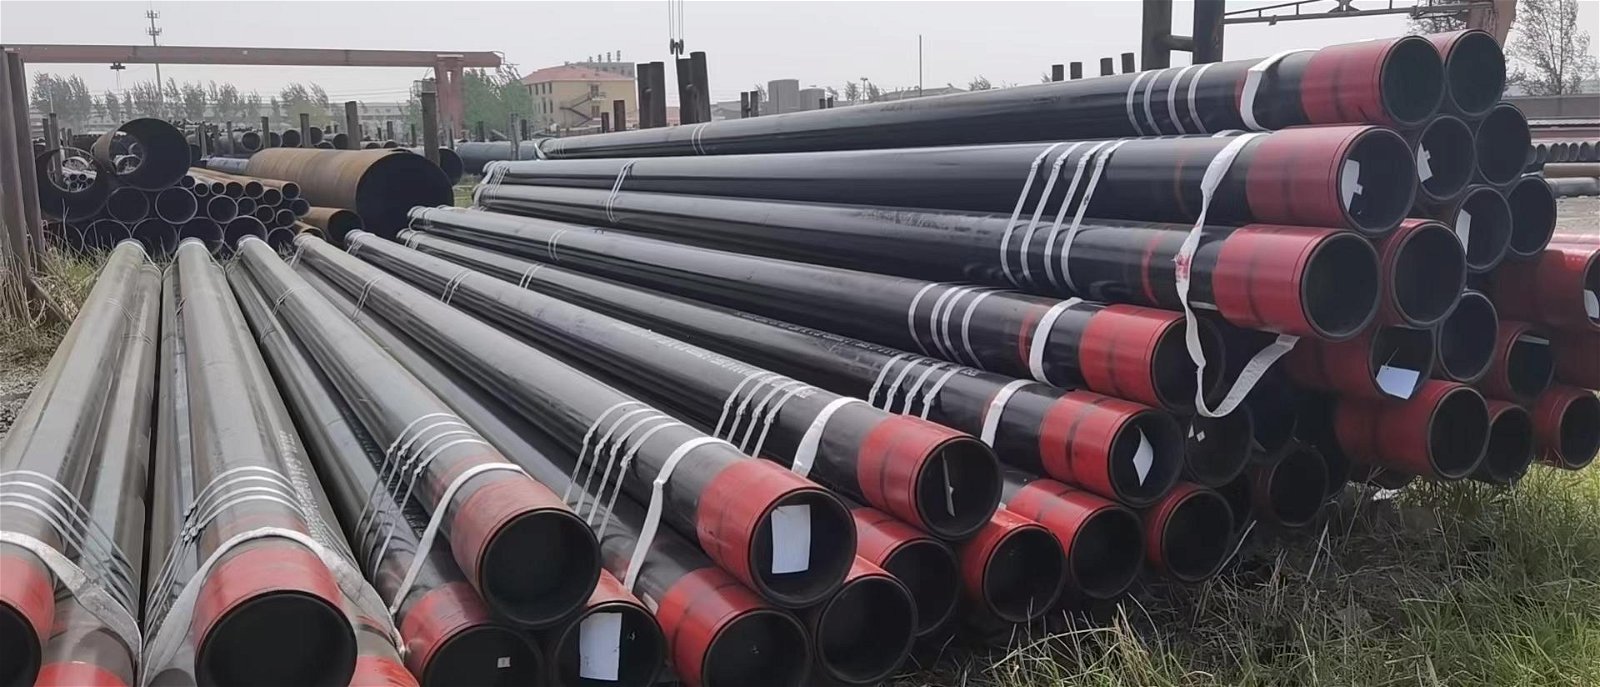 API-5CT Oil Casing Pipe And Tubing 